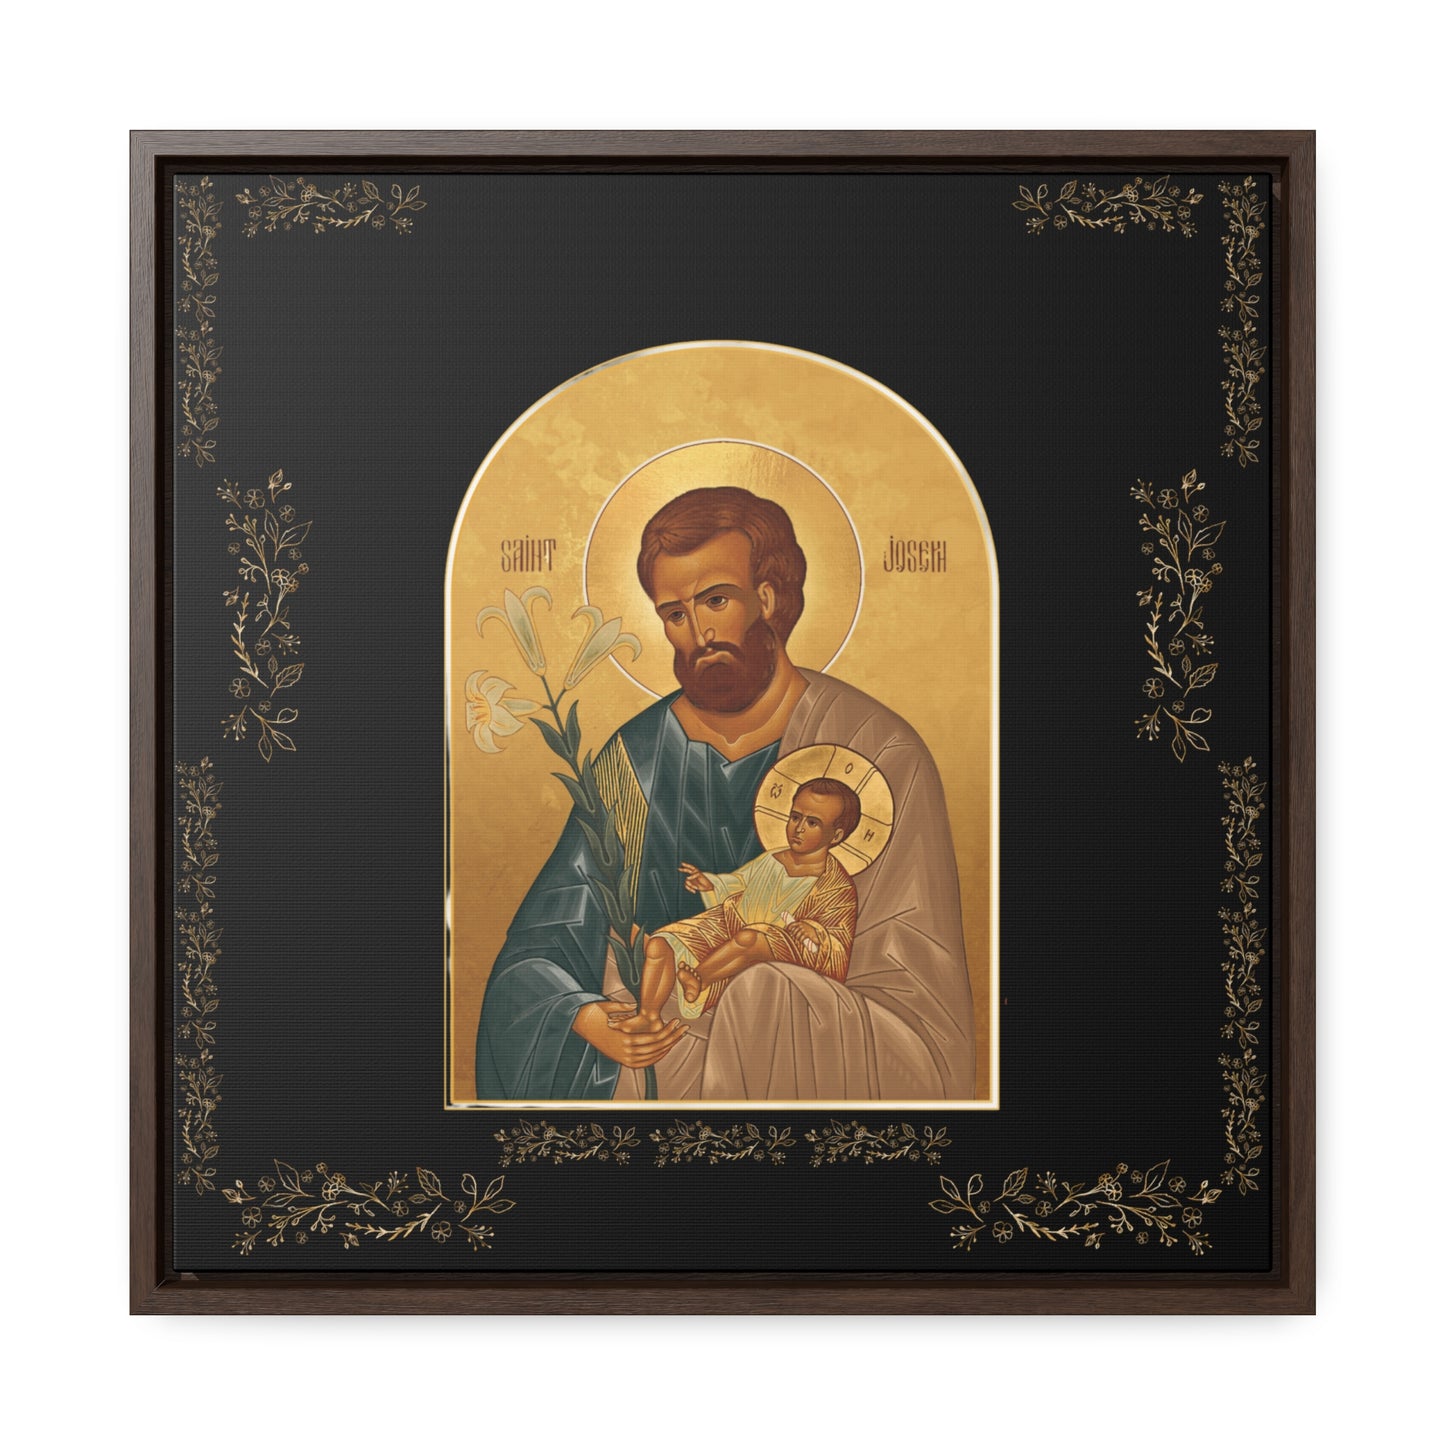 Saint Joseph and the baby Jesus-The Catholic Church of the Syriac Chaldean Tradition.